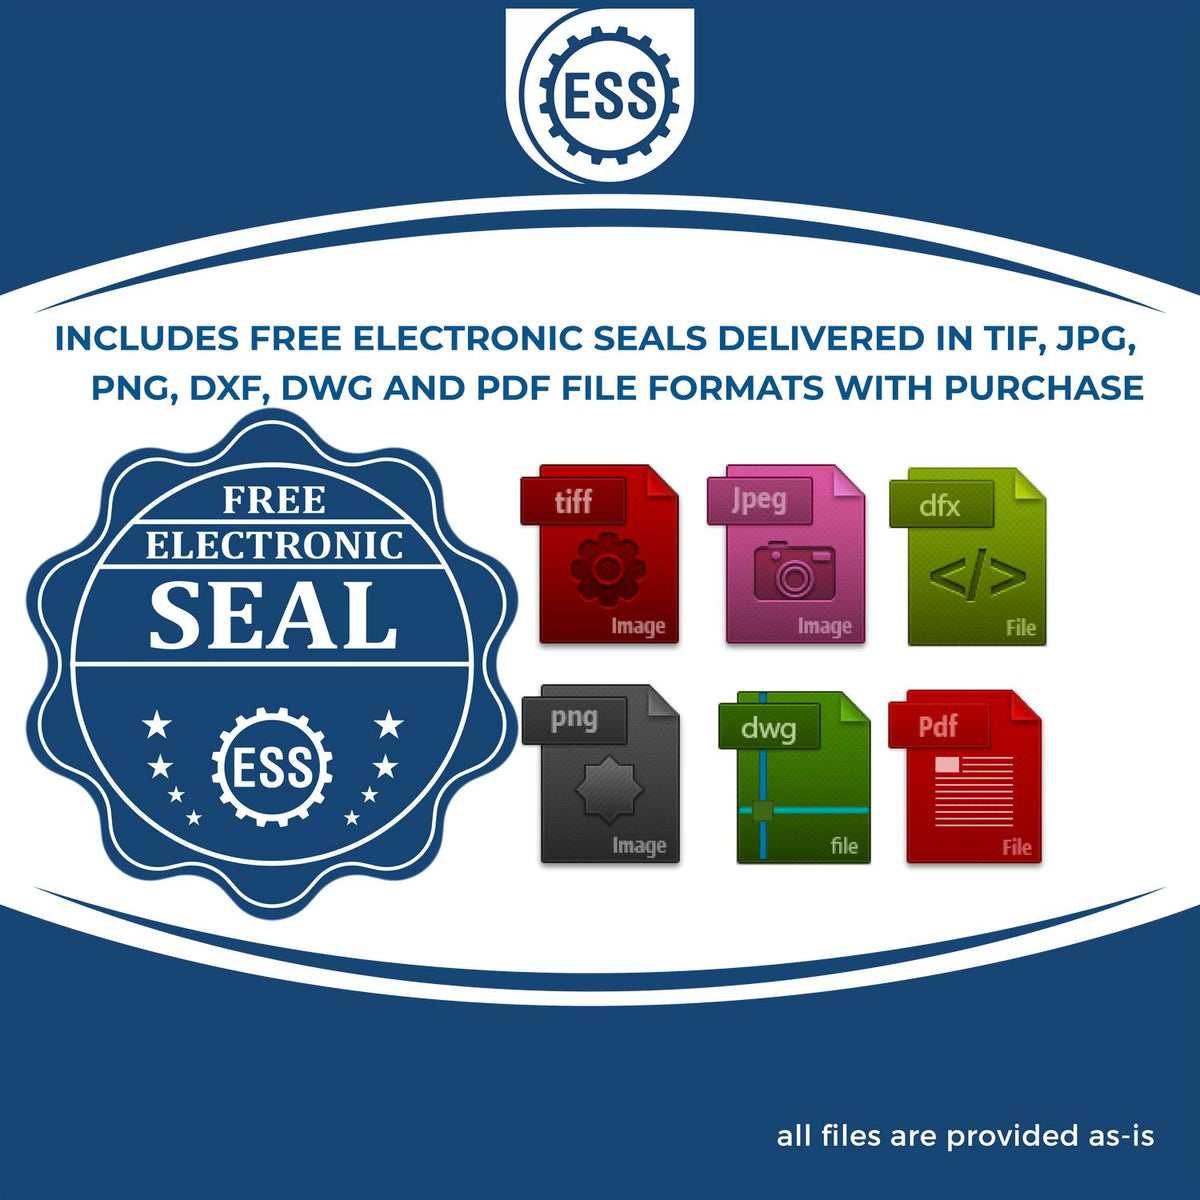 An infographic for the free electronic seal for the Slim Pre-Inked Massachusetts Professional Engineer Seal Stamp illustrating the different file type icons such as DXF, DWG, TIF, JPG and PNG.